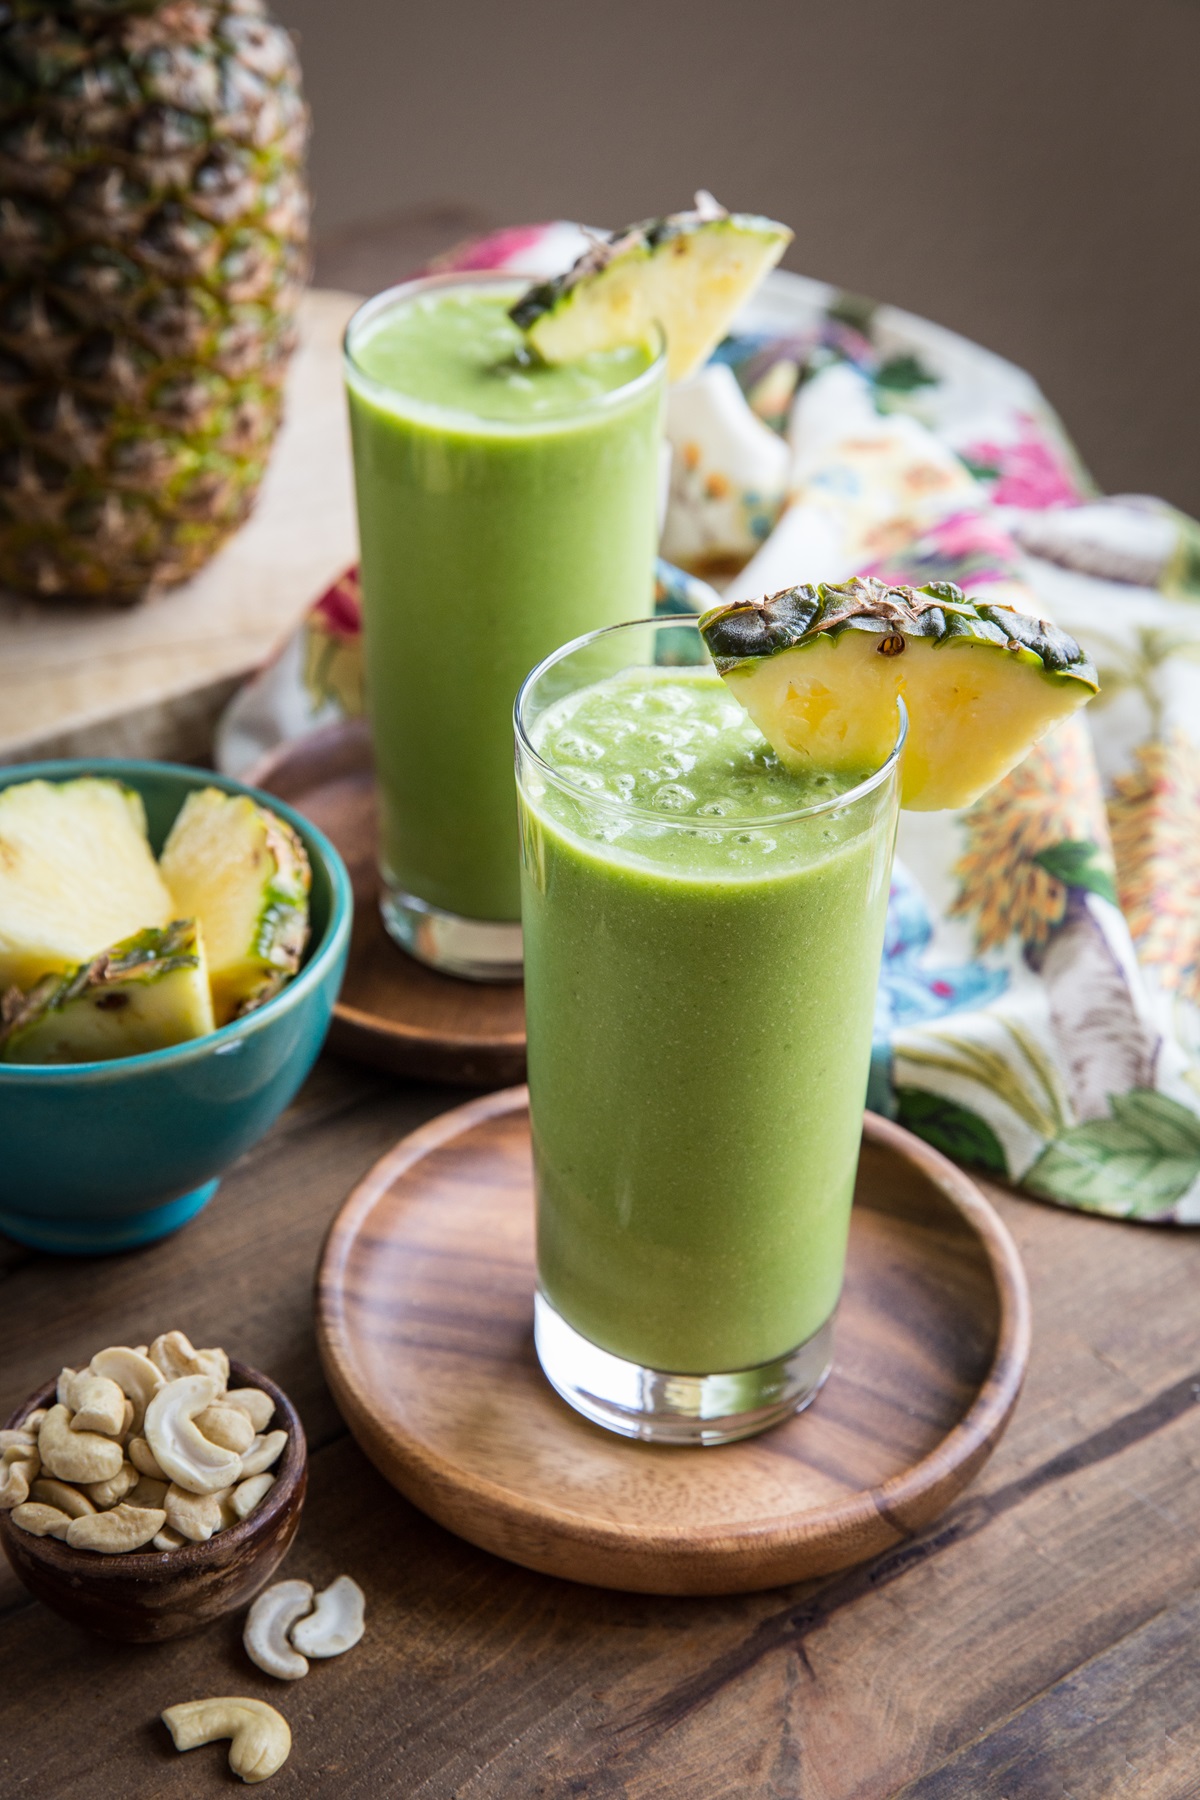 Pineapple Green Protein Smoothie - made banana-free with steamed cauliflower and packed with plant-based protein for a healthy breakfast